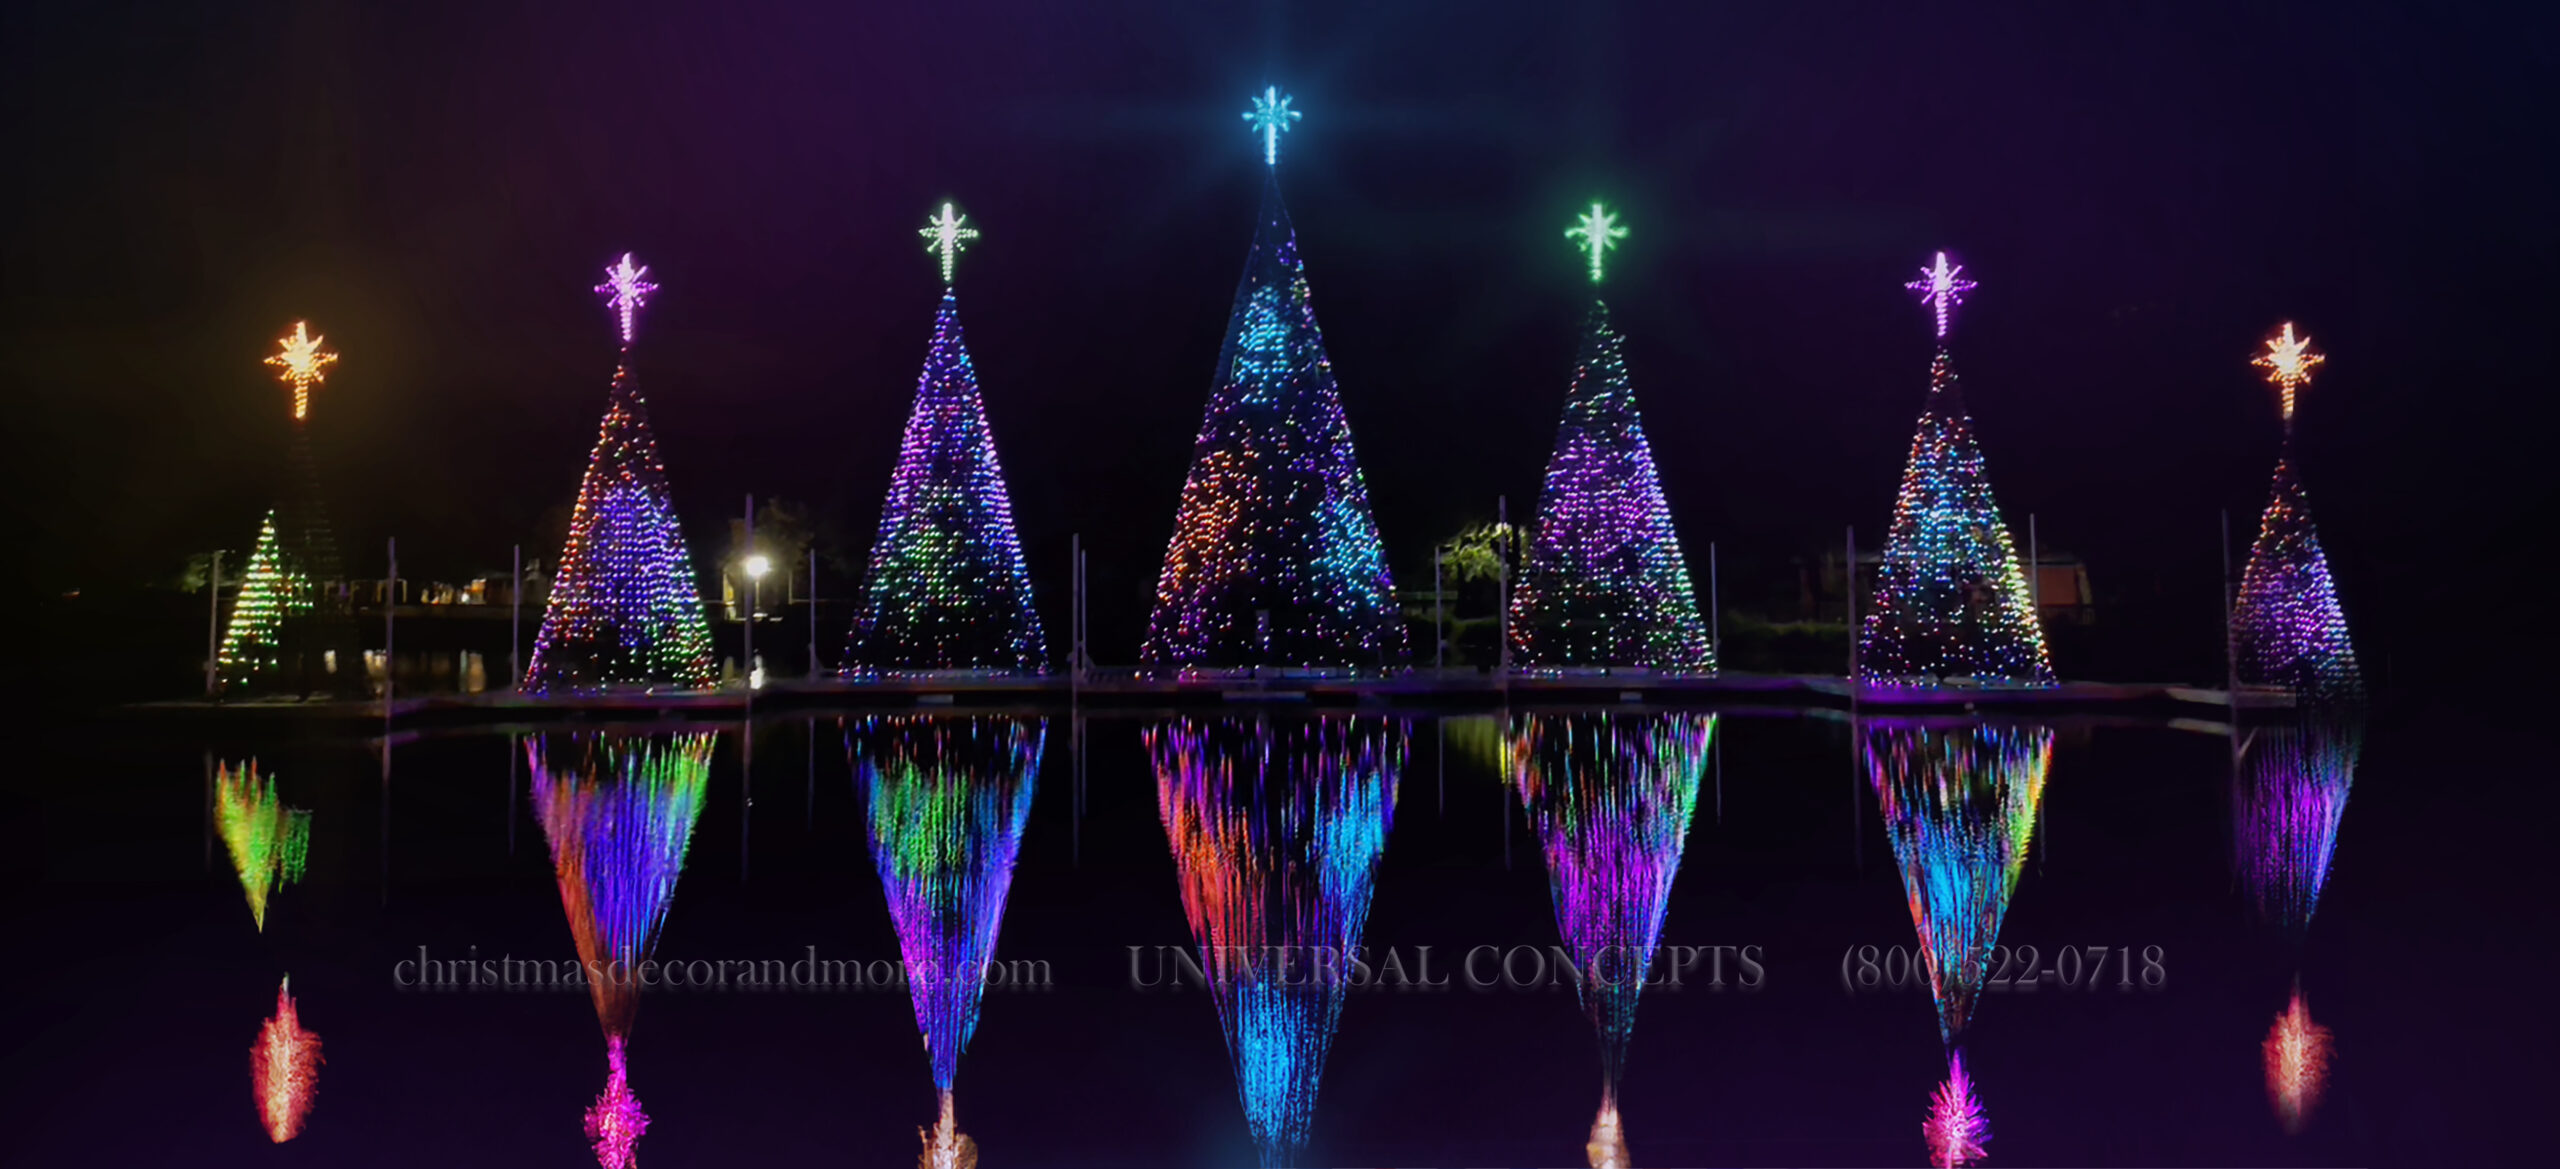 A view of color-changing RGB Christmas Trees built on custom floating docks